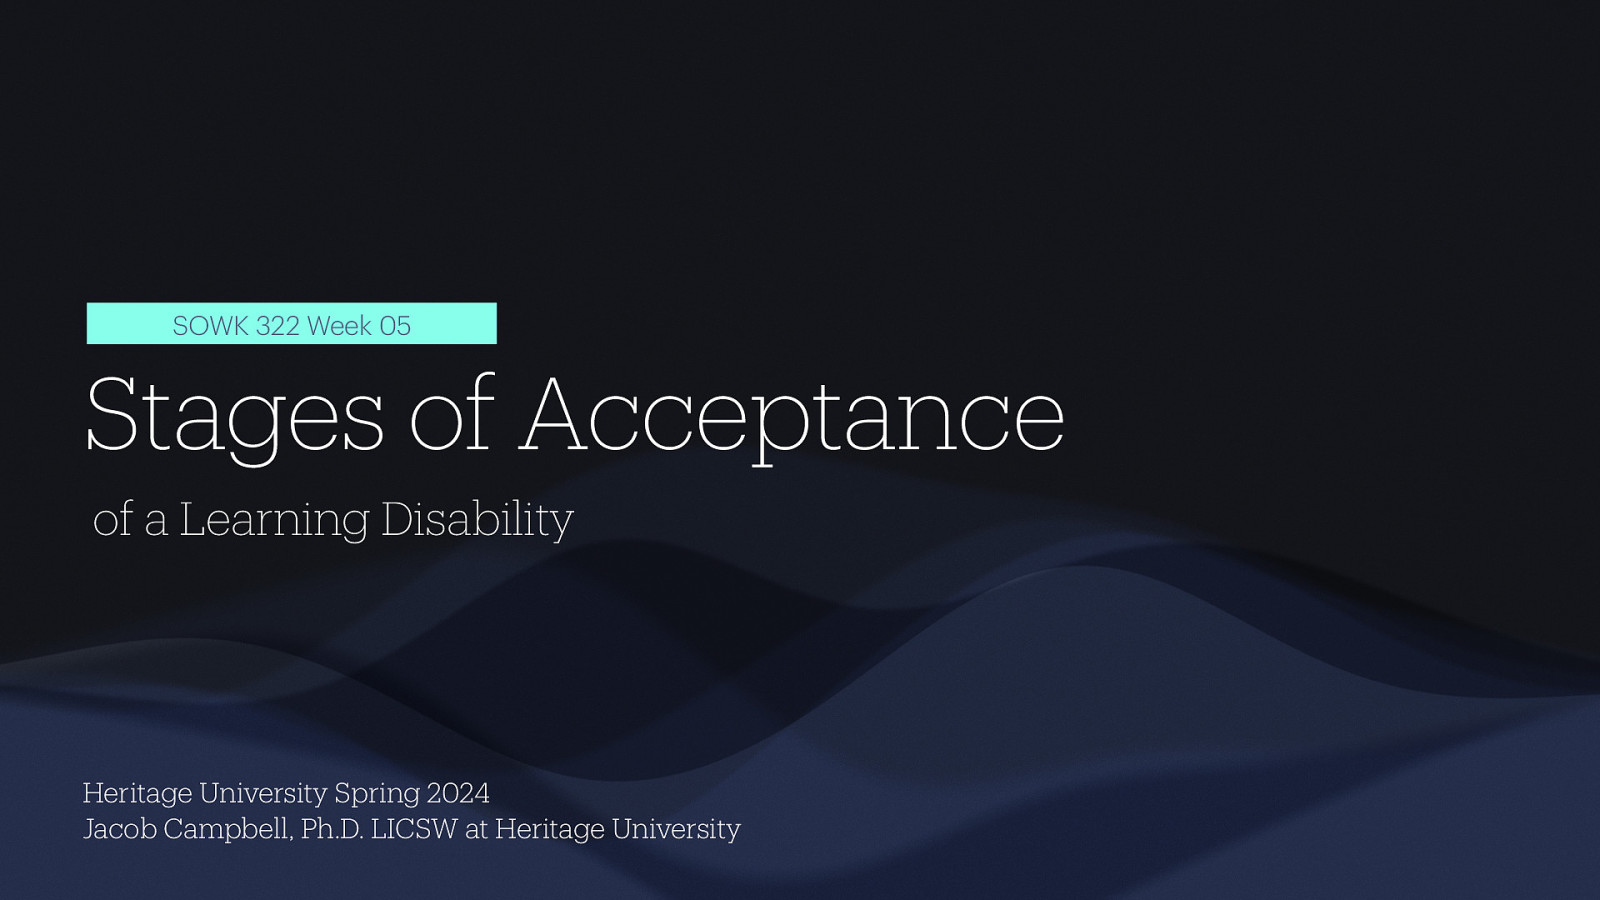 Spring 2024 SOWK 322 Week 05 - Stages of Acceptance of a Learning Disability